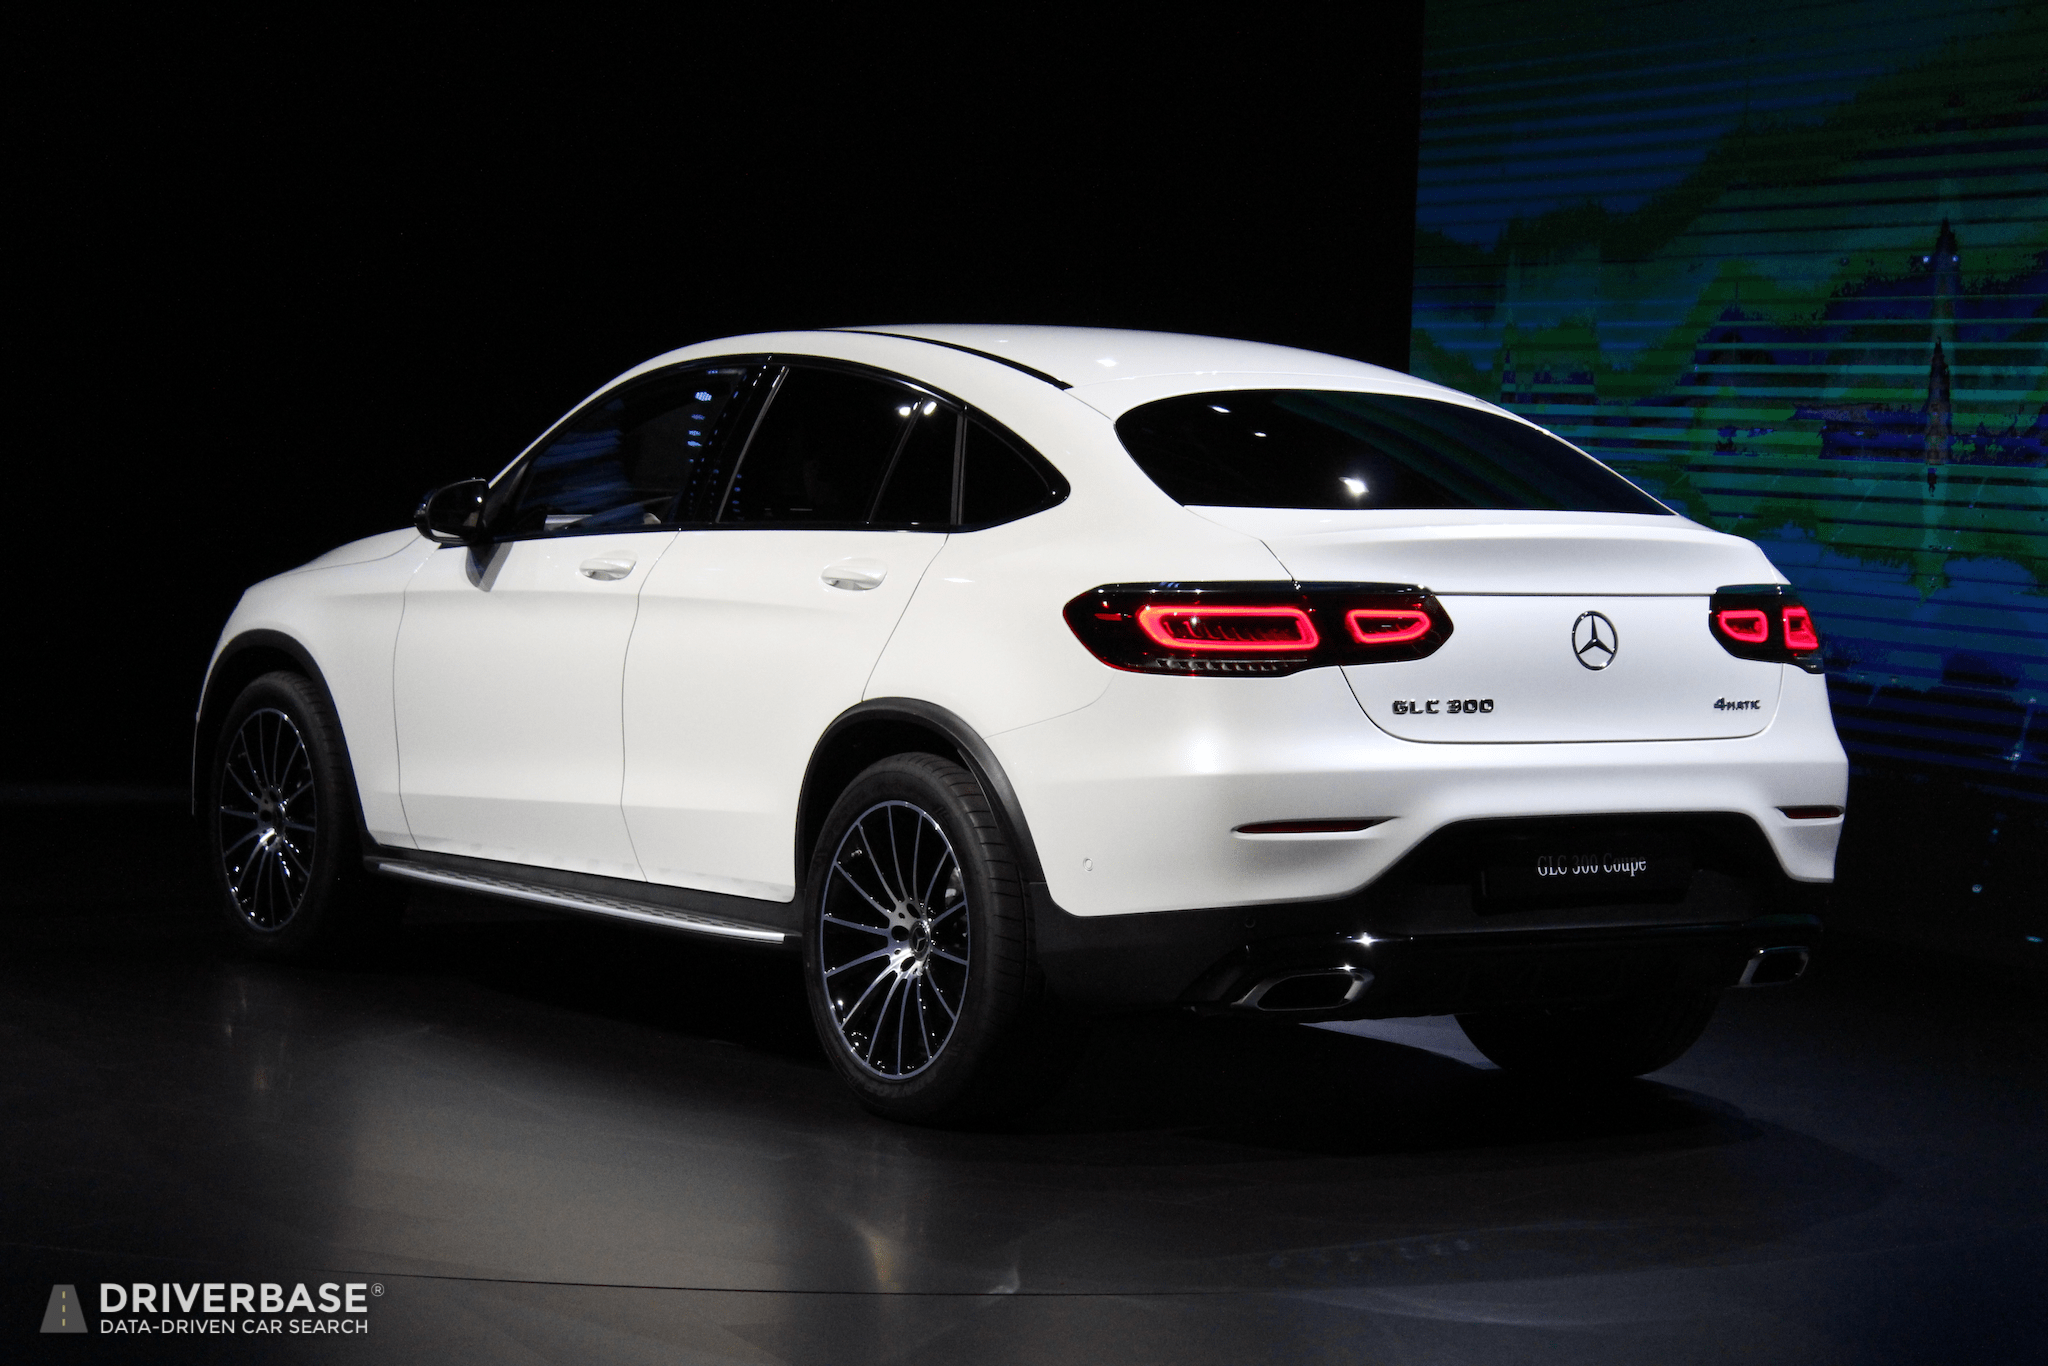 2020 MercedesBenz GLC 300 Coupe at the 2019 New York Auto Show